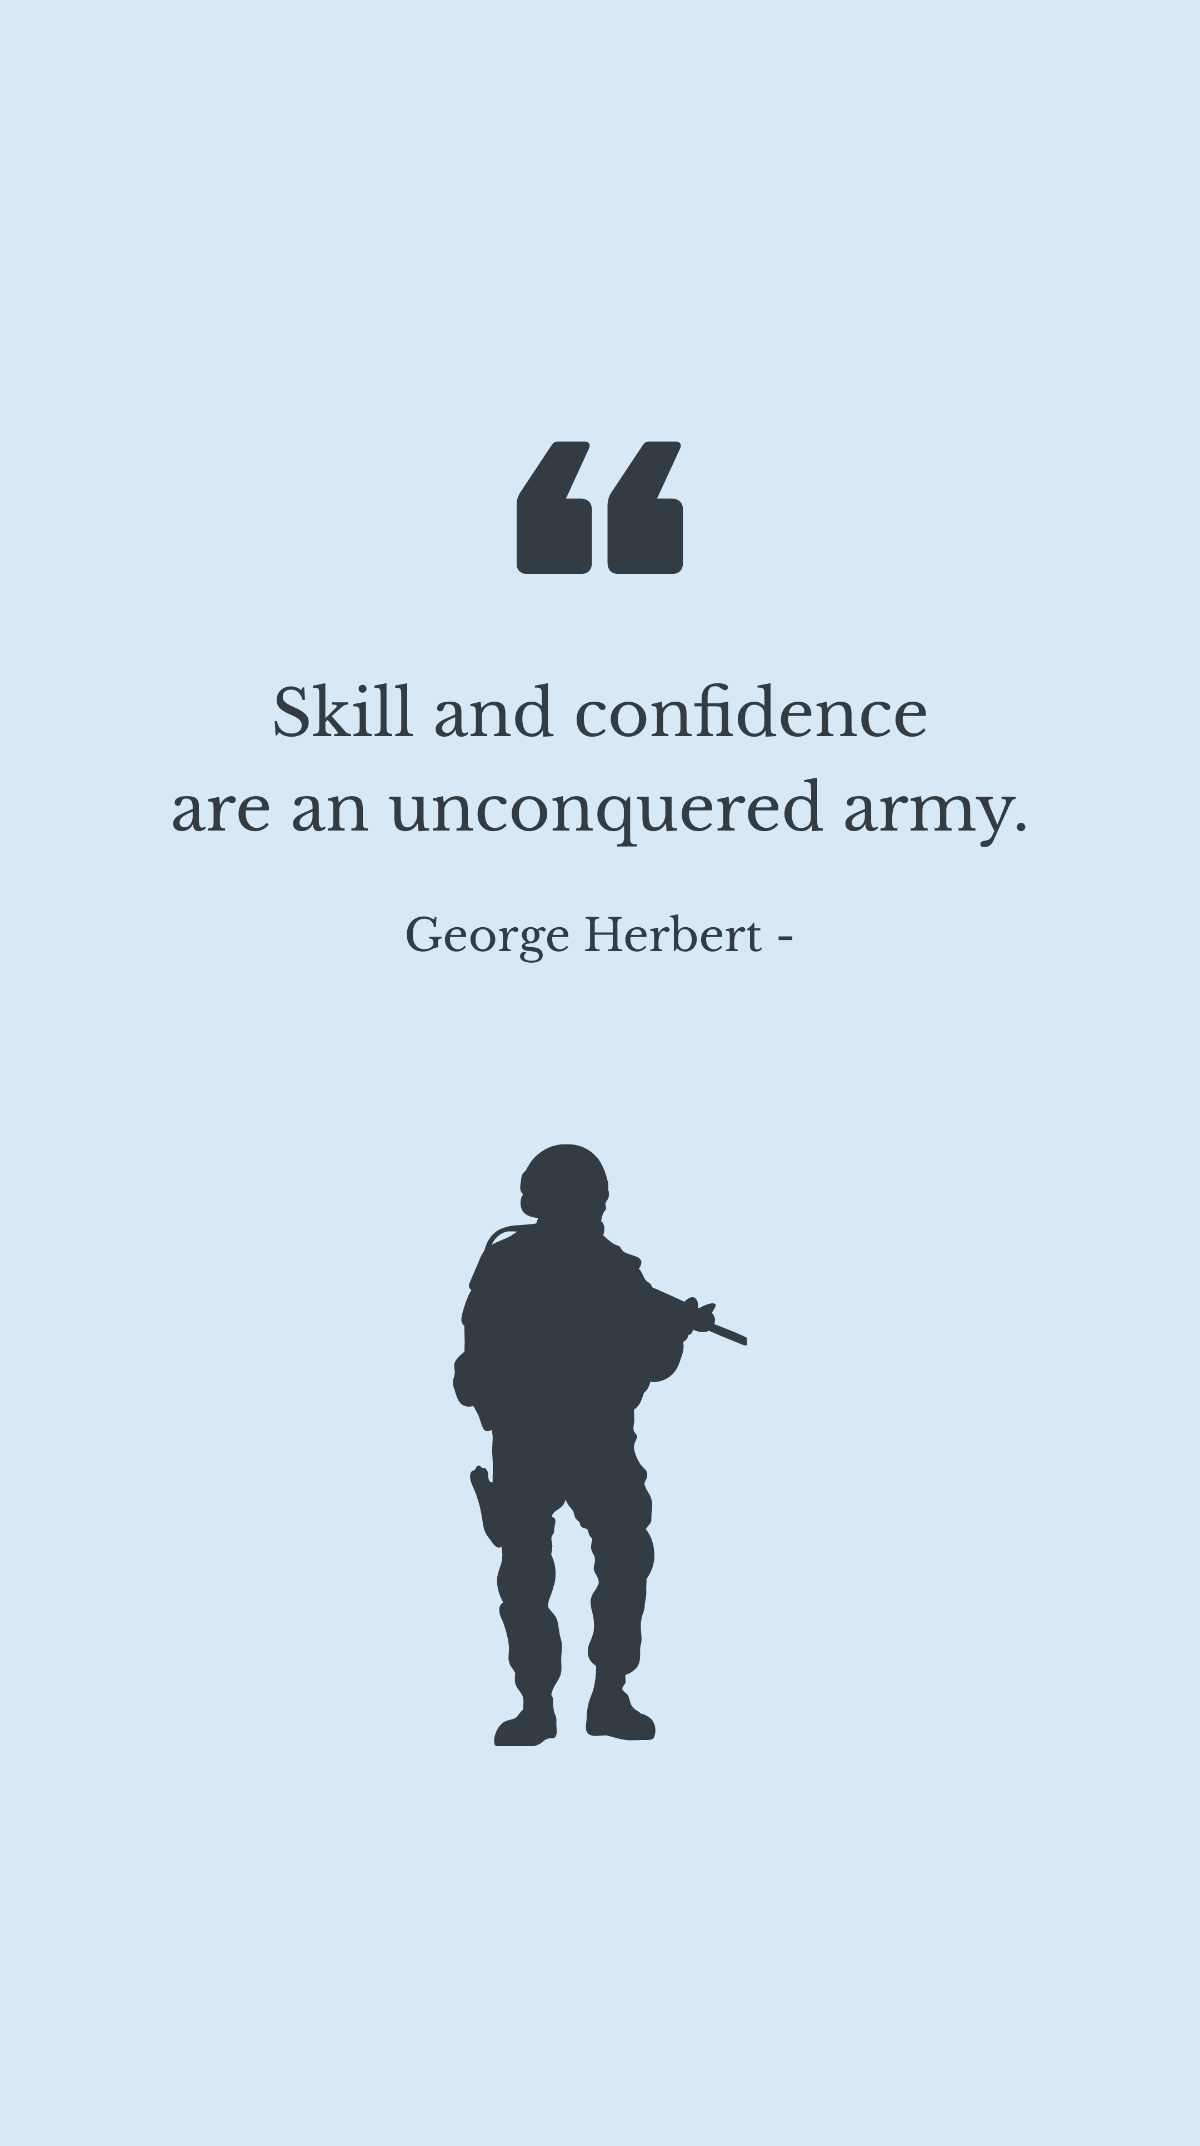 Free George Herbert - Skill and confidence are an unconquered army. Template